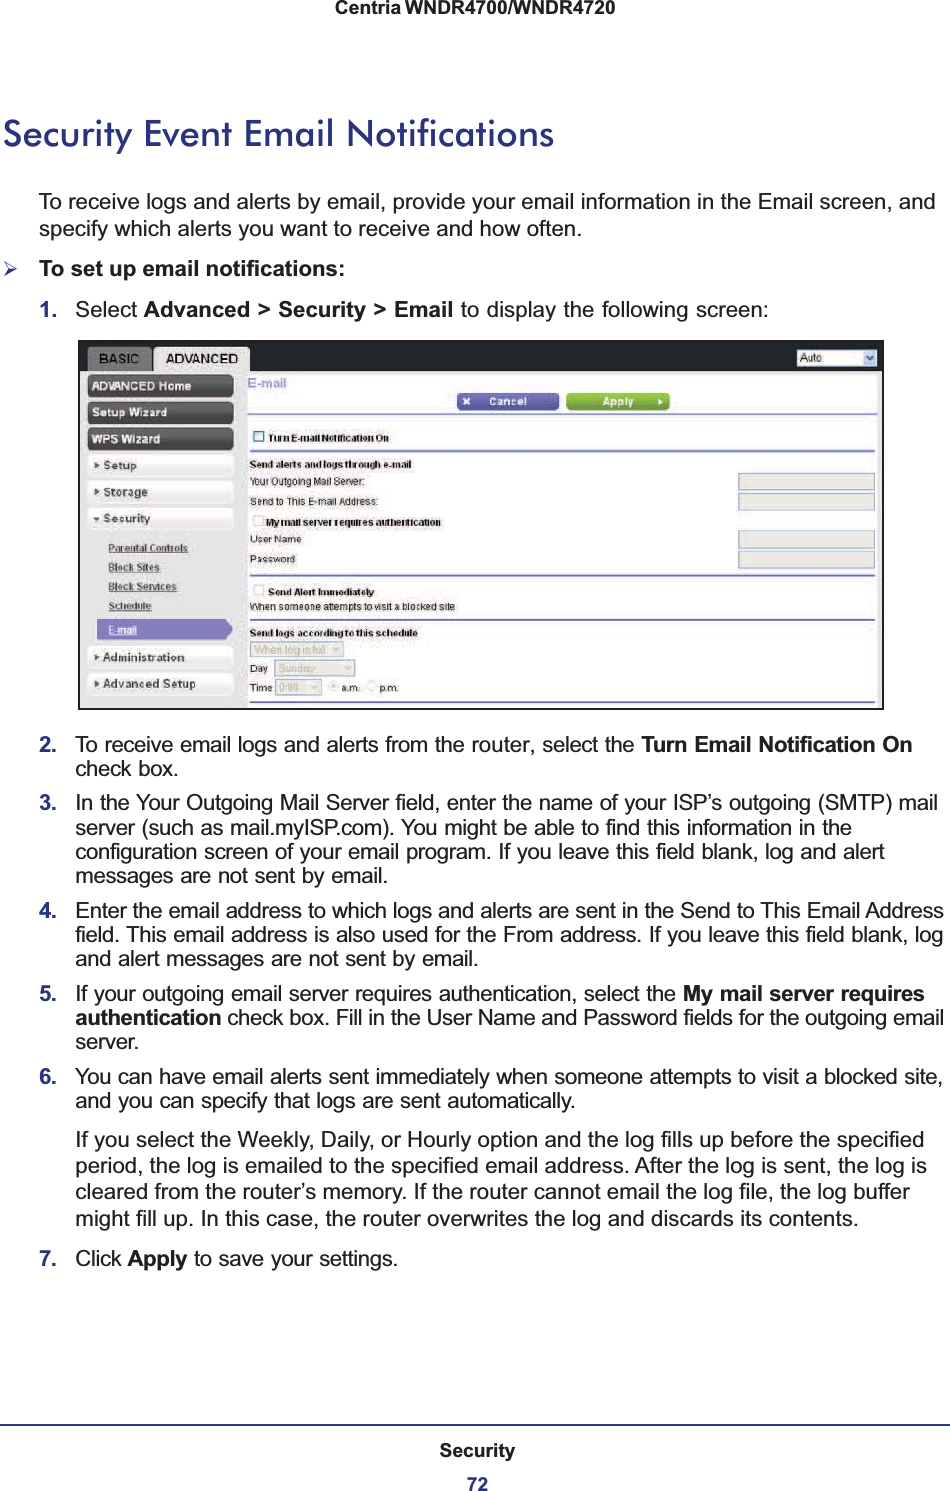 Security72Centria WNDR4700/WNDR4720 Security Event Email NotificationsTo receive logs and alerts by email, provide your email information in the Email screen, and specify which alerts you want to receive and how often. ¾To set up email notifications:1. Select Advanced &gt; Security &gt; Email to display the following screen:2. To receive email logs and alerts from the router, select the Turn Email Notification On check box.3. In the Your Outgoing Mail Server field, enter the name of your ISP’s outgoing (SMTP) mail server (such as mail.myISP.com). You might be able to find this information in the configuration screen of your email program. If you leave this field blank, log and alert messages are not sent by email.4. Enter the email address to which logs and alerts are sent in the Send to This Email Address field. This email address is also used for the From address. If you leave this field blank, log and alert messages are not sent by email.5. If your outgoing email server requires authentication, select the My mail server requires authentication check box. Fill in the User Name and Password fields for the outgoing email server.6. You can have email alerts sent immediately when someone attempts to visit a blocked site, and you can specify that logs are sent automatically.If you select the Weekly, Daily, or Hourly option and the log fills up before the specified period, the log is emailed to the specified email address. After the log is sent, the log is cleared from the router’s memory. If the router cannot email the log file, the log buffer might fill up. In this case, the router overwrites the log and discards its contents.7. Click Apply to save your settings.